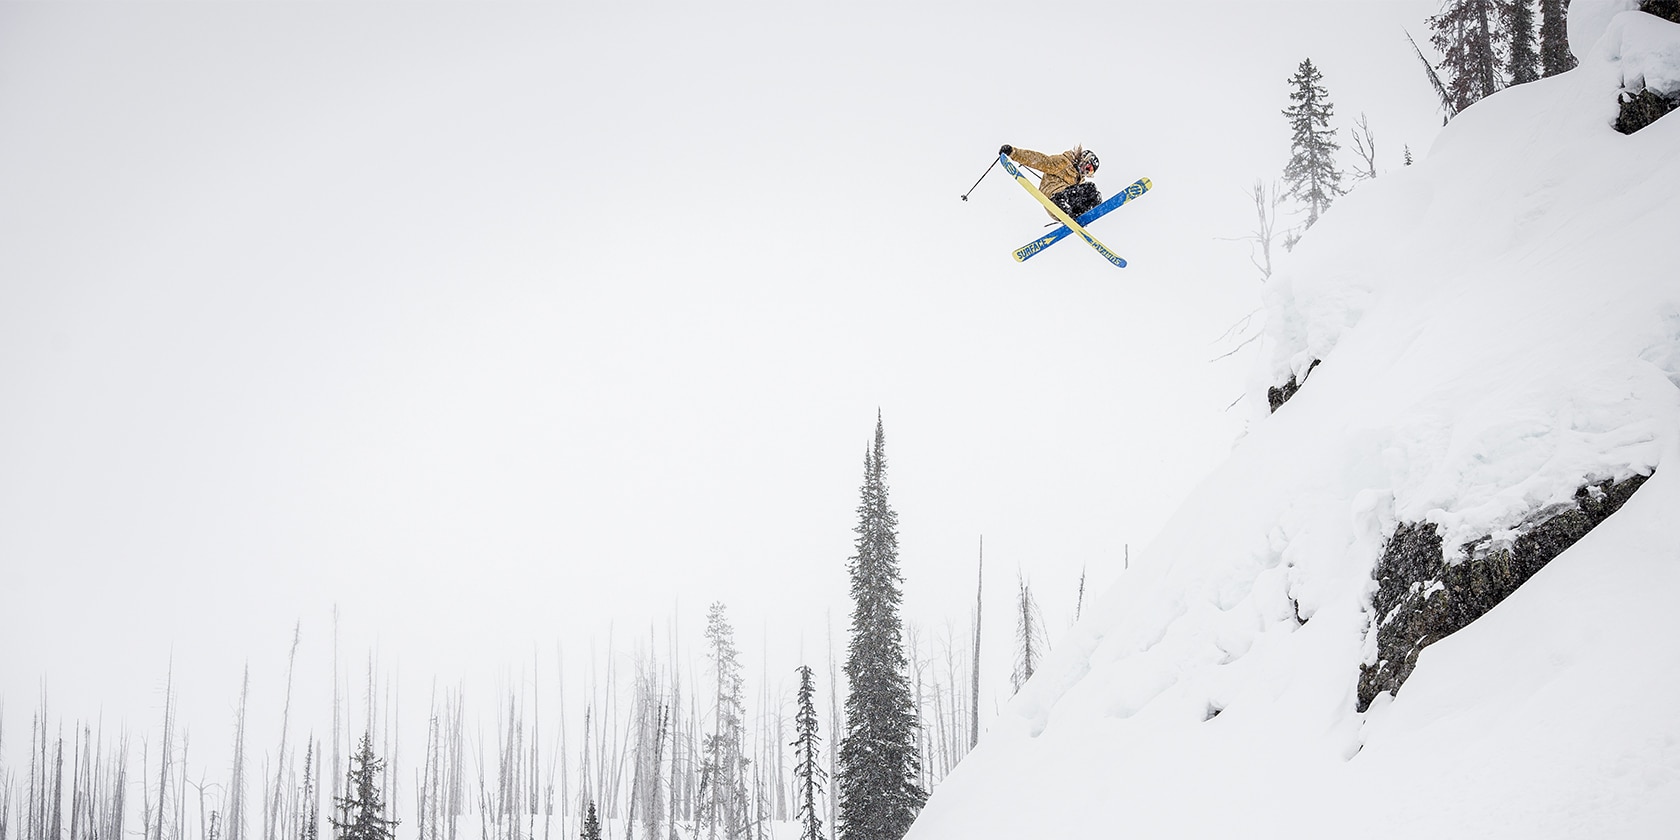 person flying through the air off a snow covered cliff wearing skiis